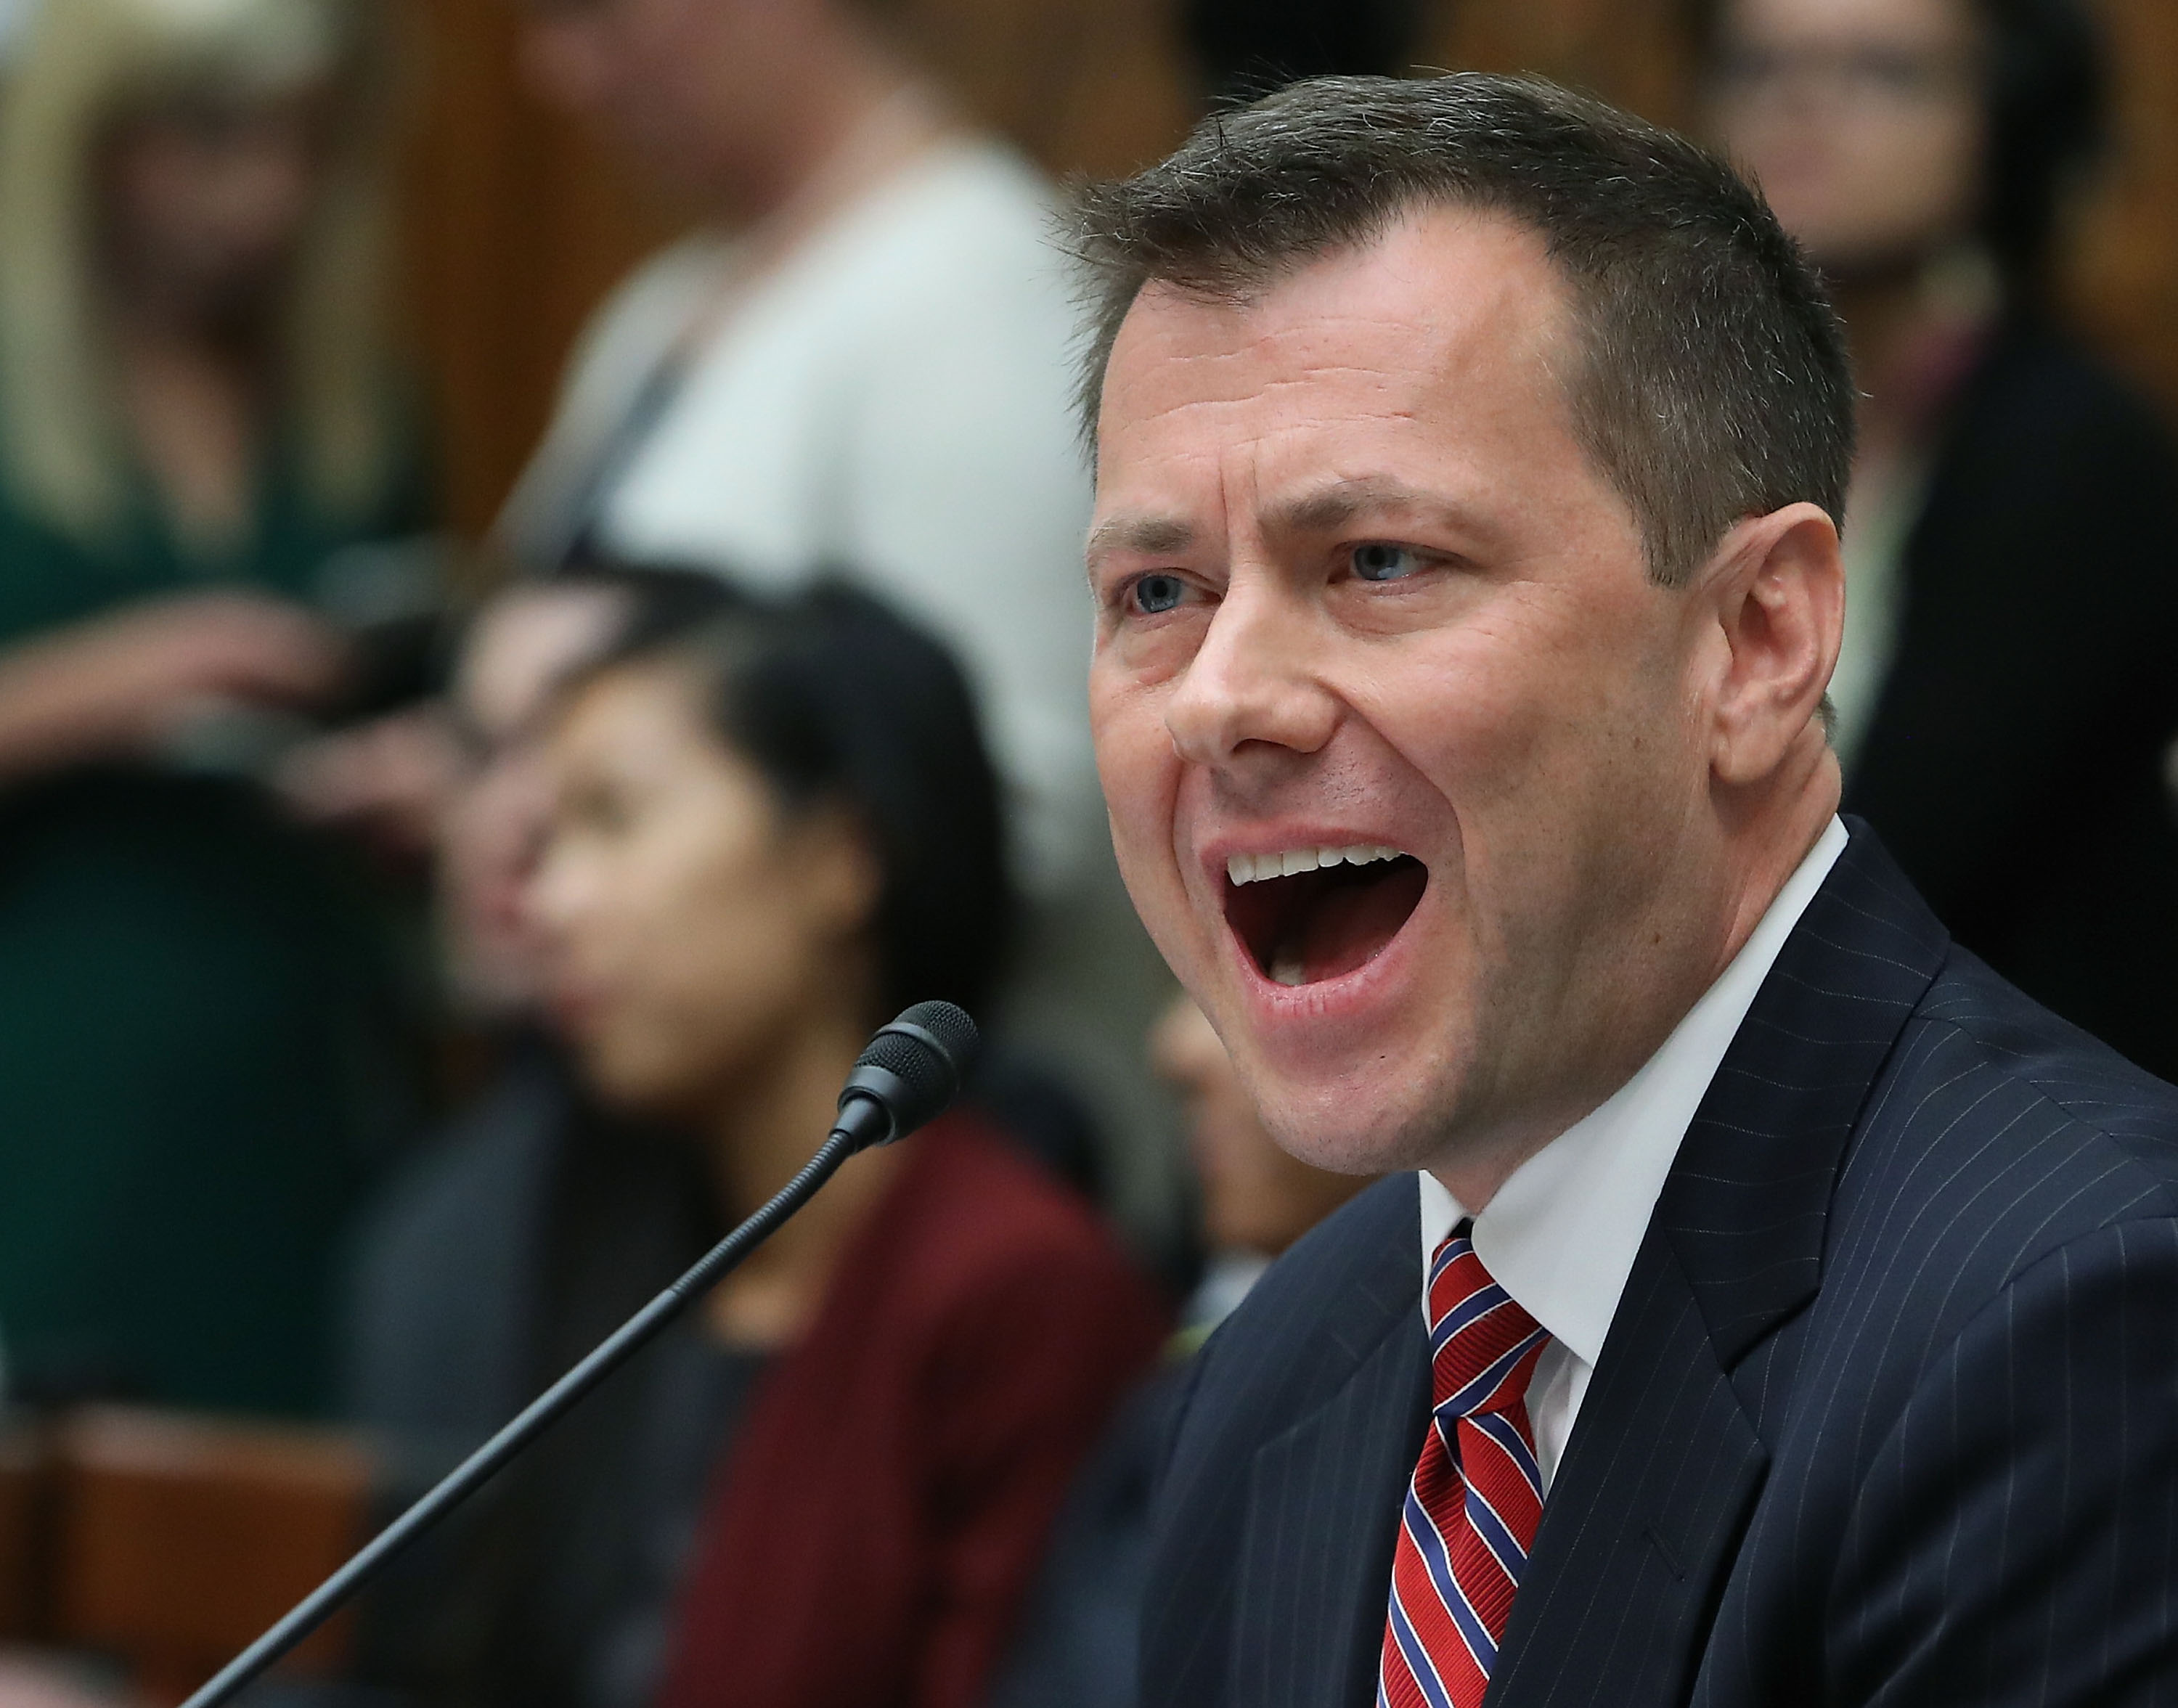 Peter Strzok 5 Fast Facts You Need to Know